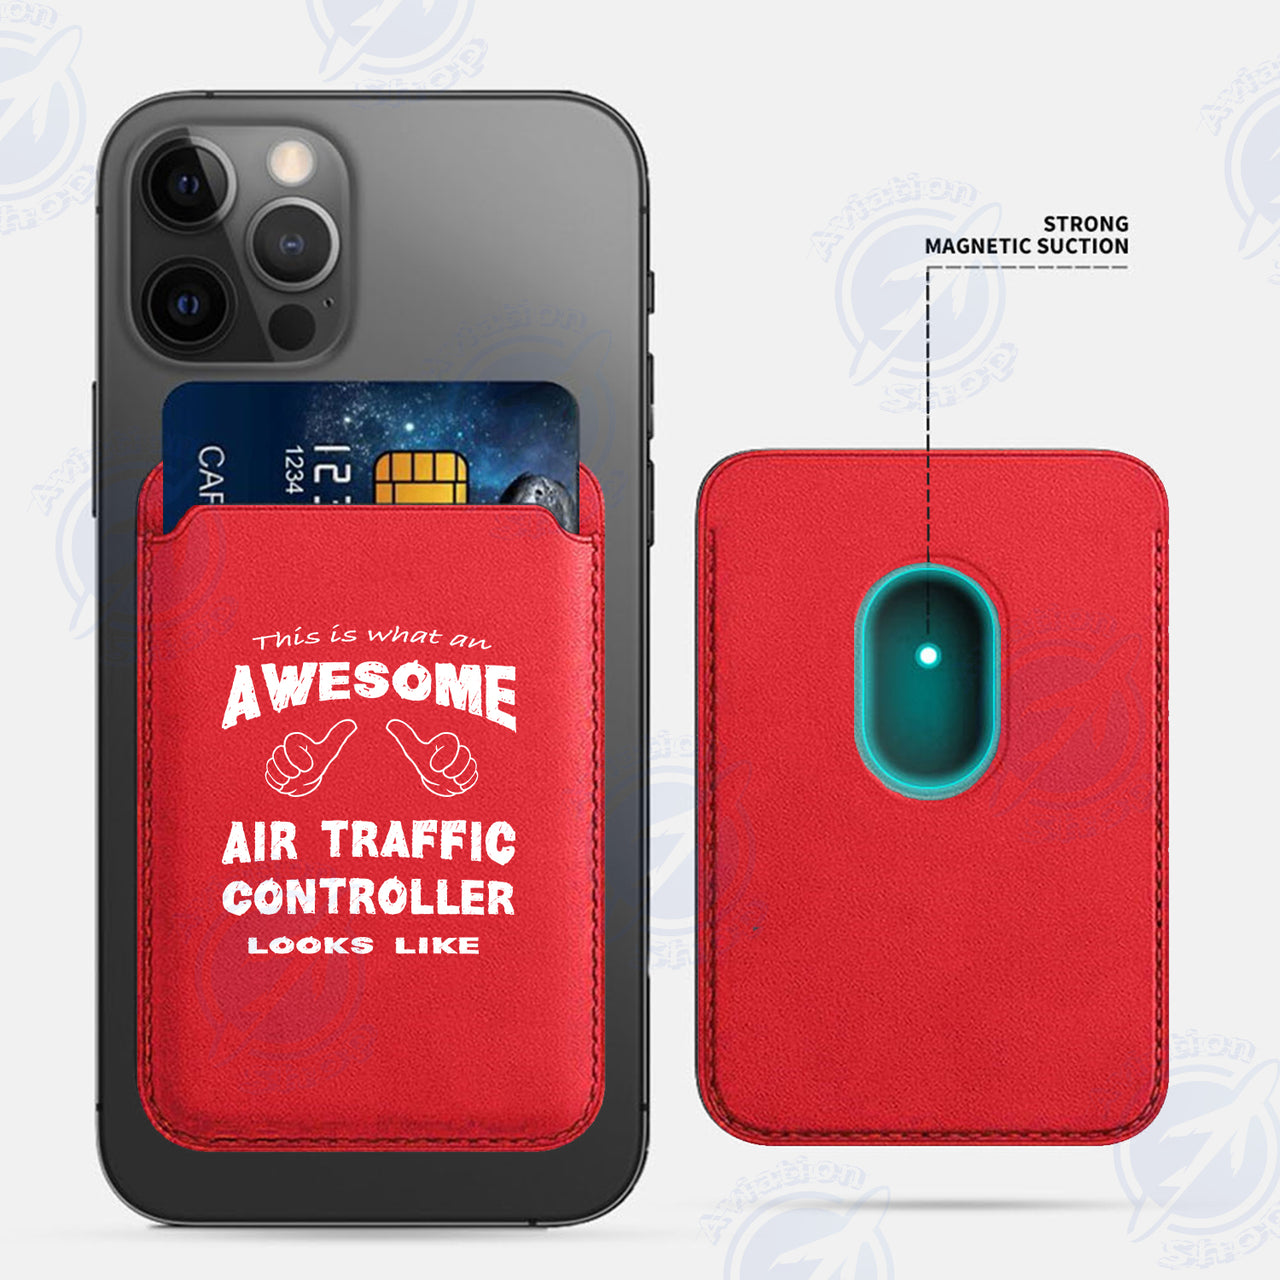 Air Traffic Controller iPhone Cases Magnetic Card Wallet